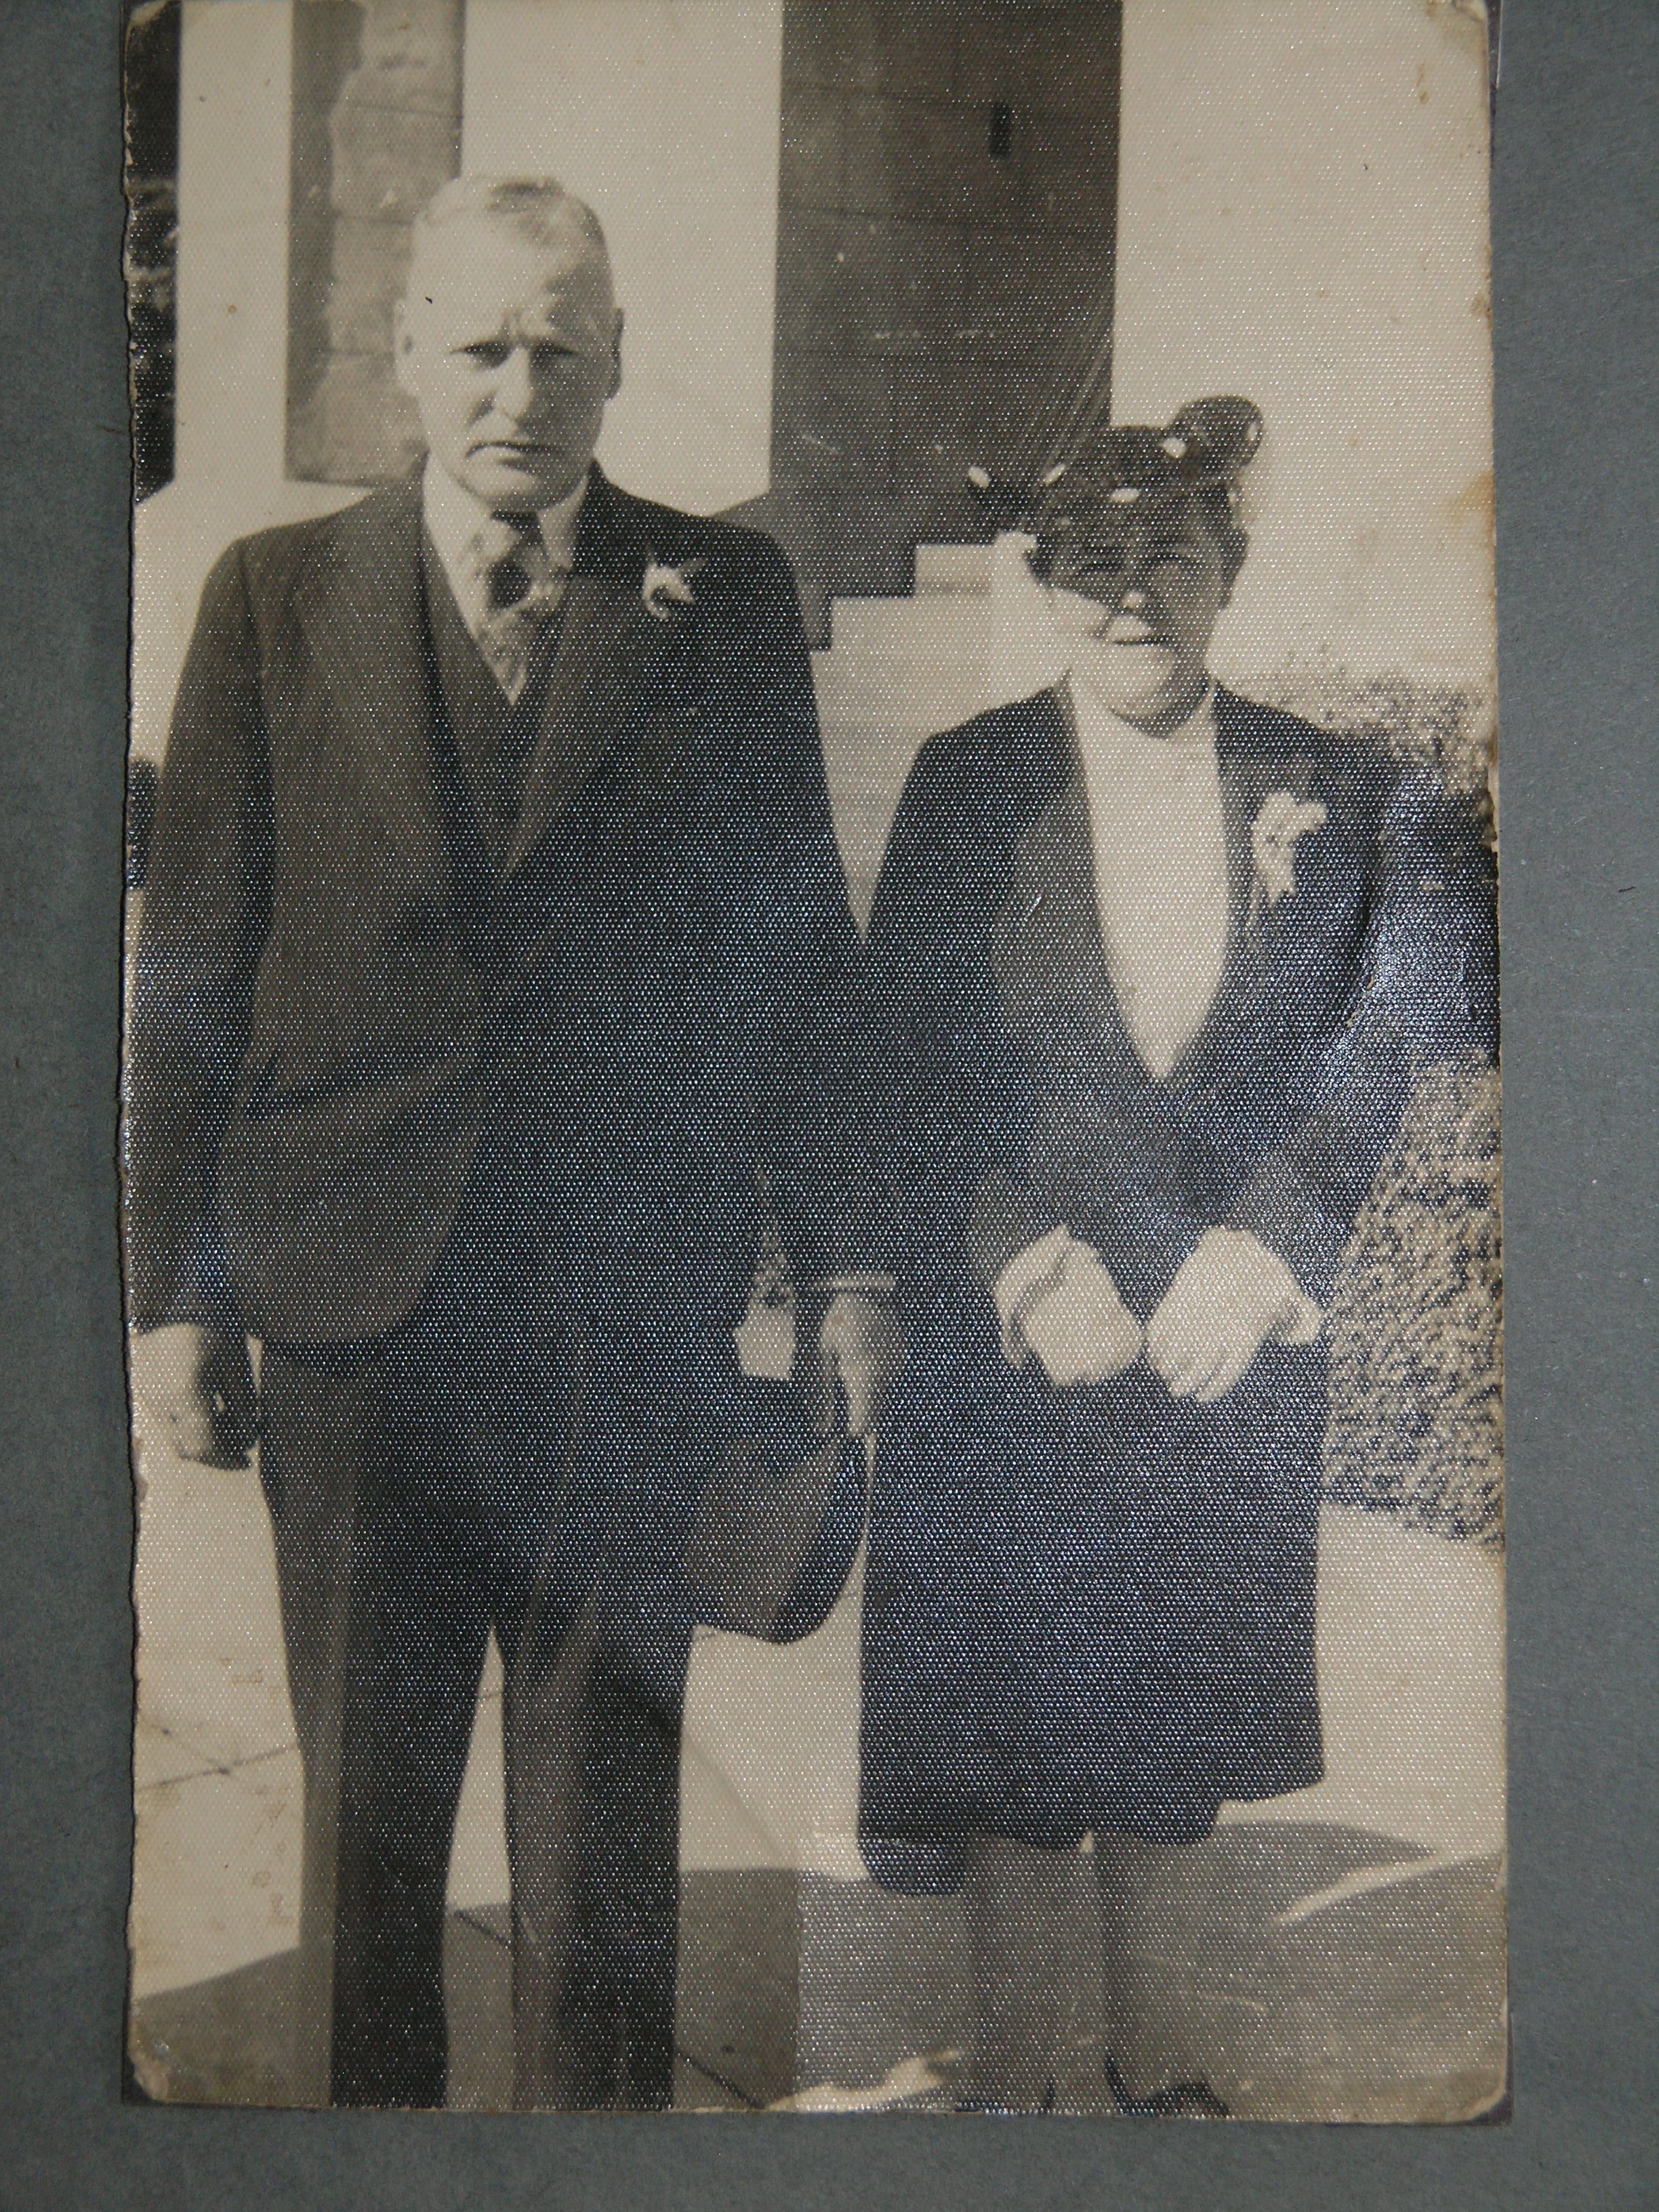 Cecil Solomon Marks and his wife, Ivy May